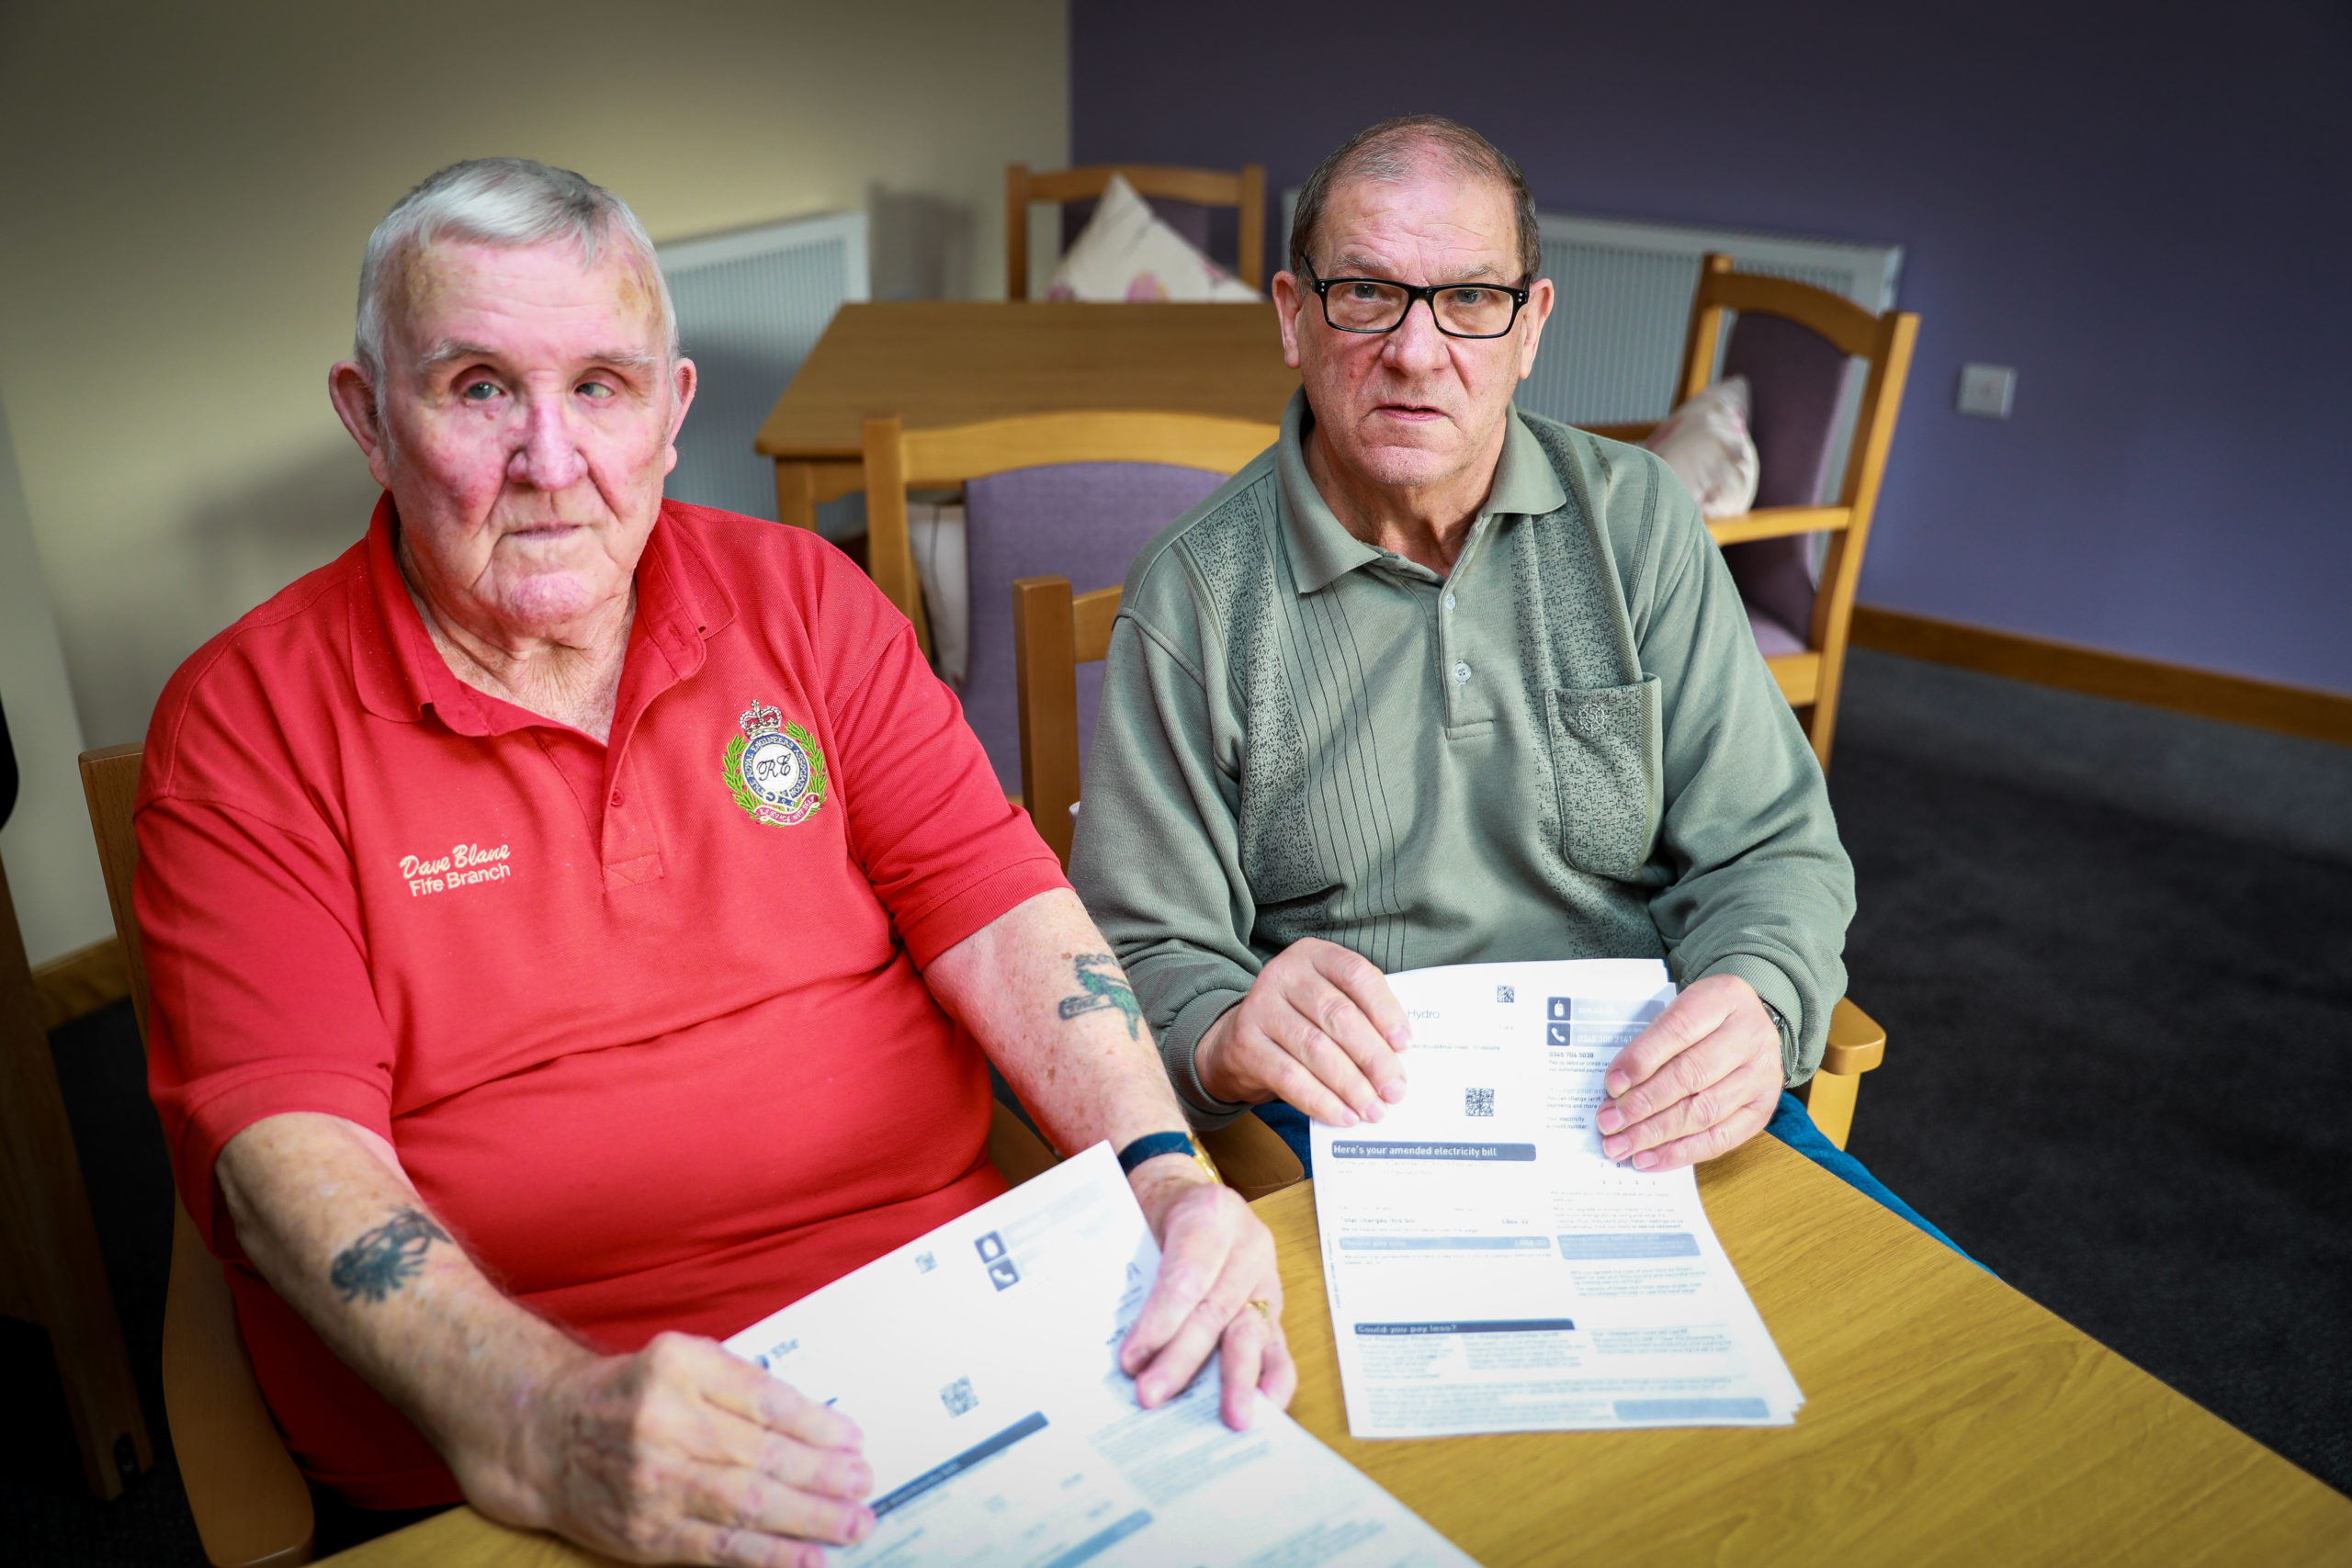 Dave Blane, 79,and Drew Barnes, 73,  with their Den Court utility bills.